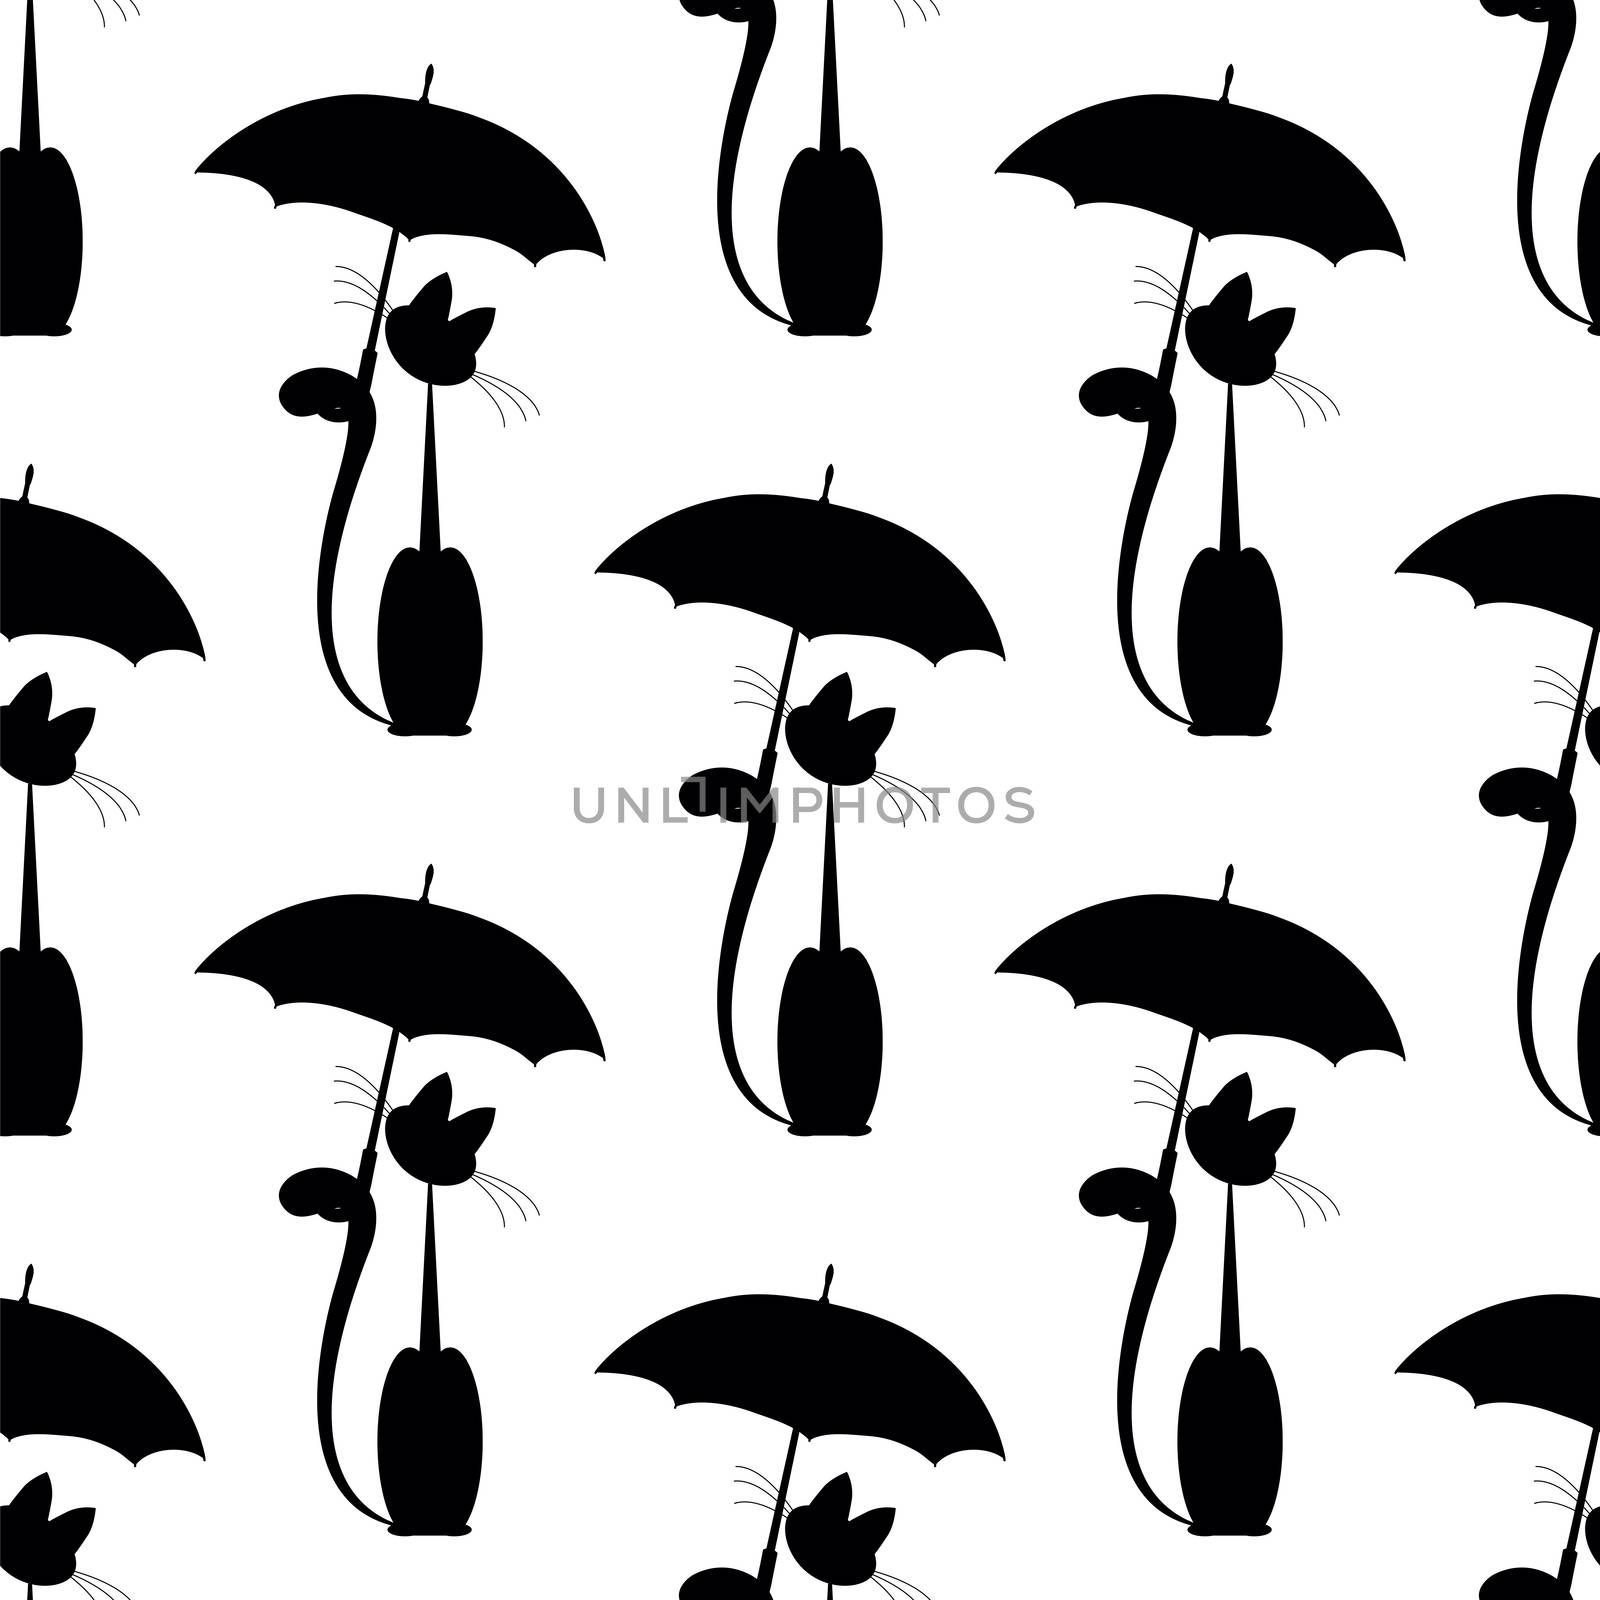 seamless pattern with Cat in umbrella